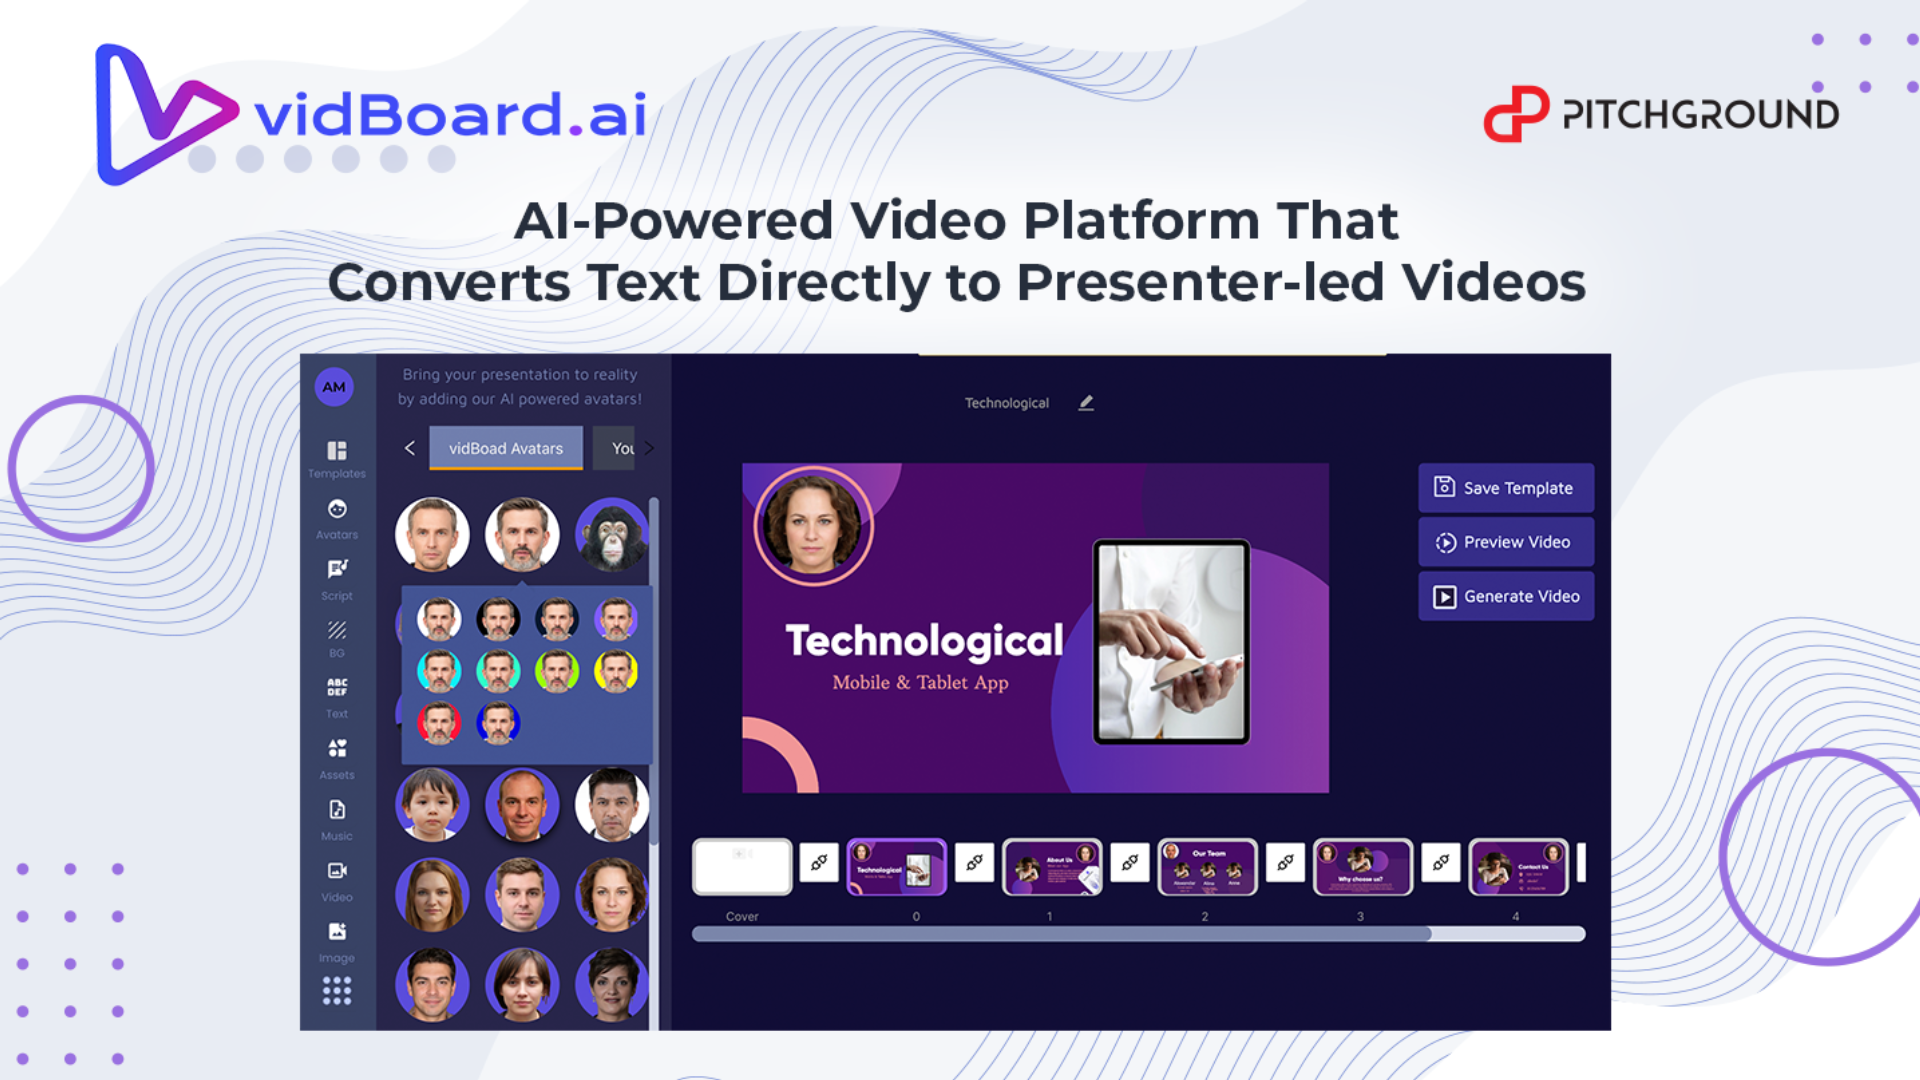 Lifetime Deal to vidBoard.ai: Plan D for $1097